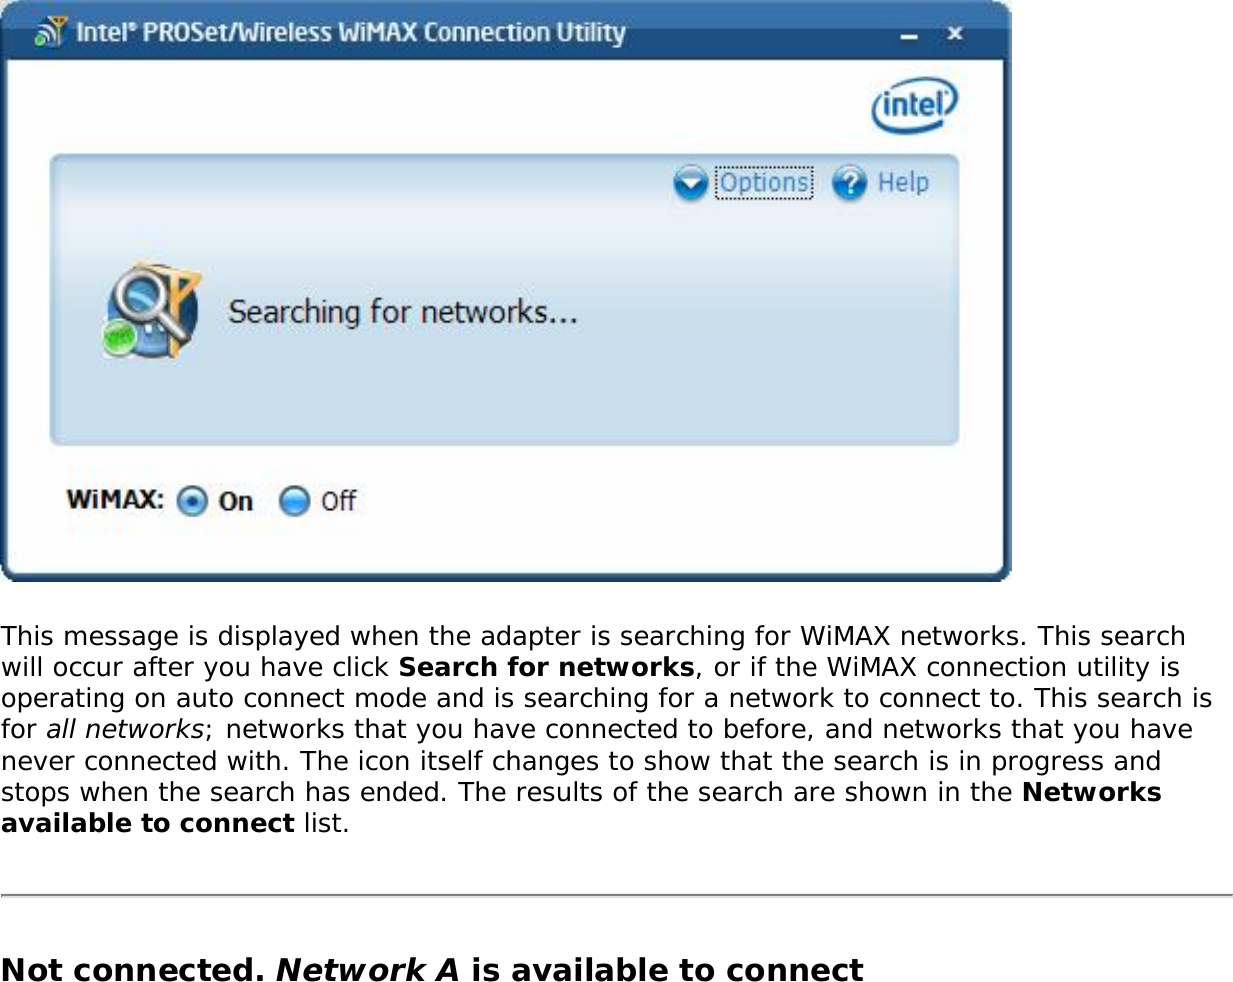 This message is displayed when the adapter is searching for WiMAX networks. This search will occur after you have click Search for networks, or if the WiMAX connection utility is operating on auto connect mode and is searching for a network to connect to. This search is for all networks; networks that you have connected to before, and networks that you have never connected with. The icon itself changes to show that the search is in progress and stops when the search has ended. The results of the search are shown in the Networks available to connect list. Not connected. Network A is available to connect